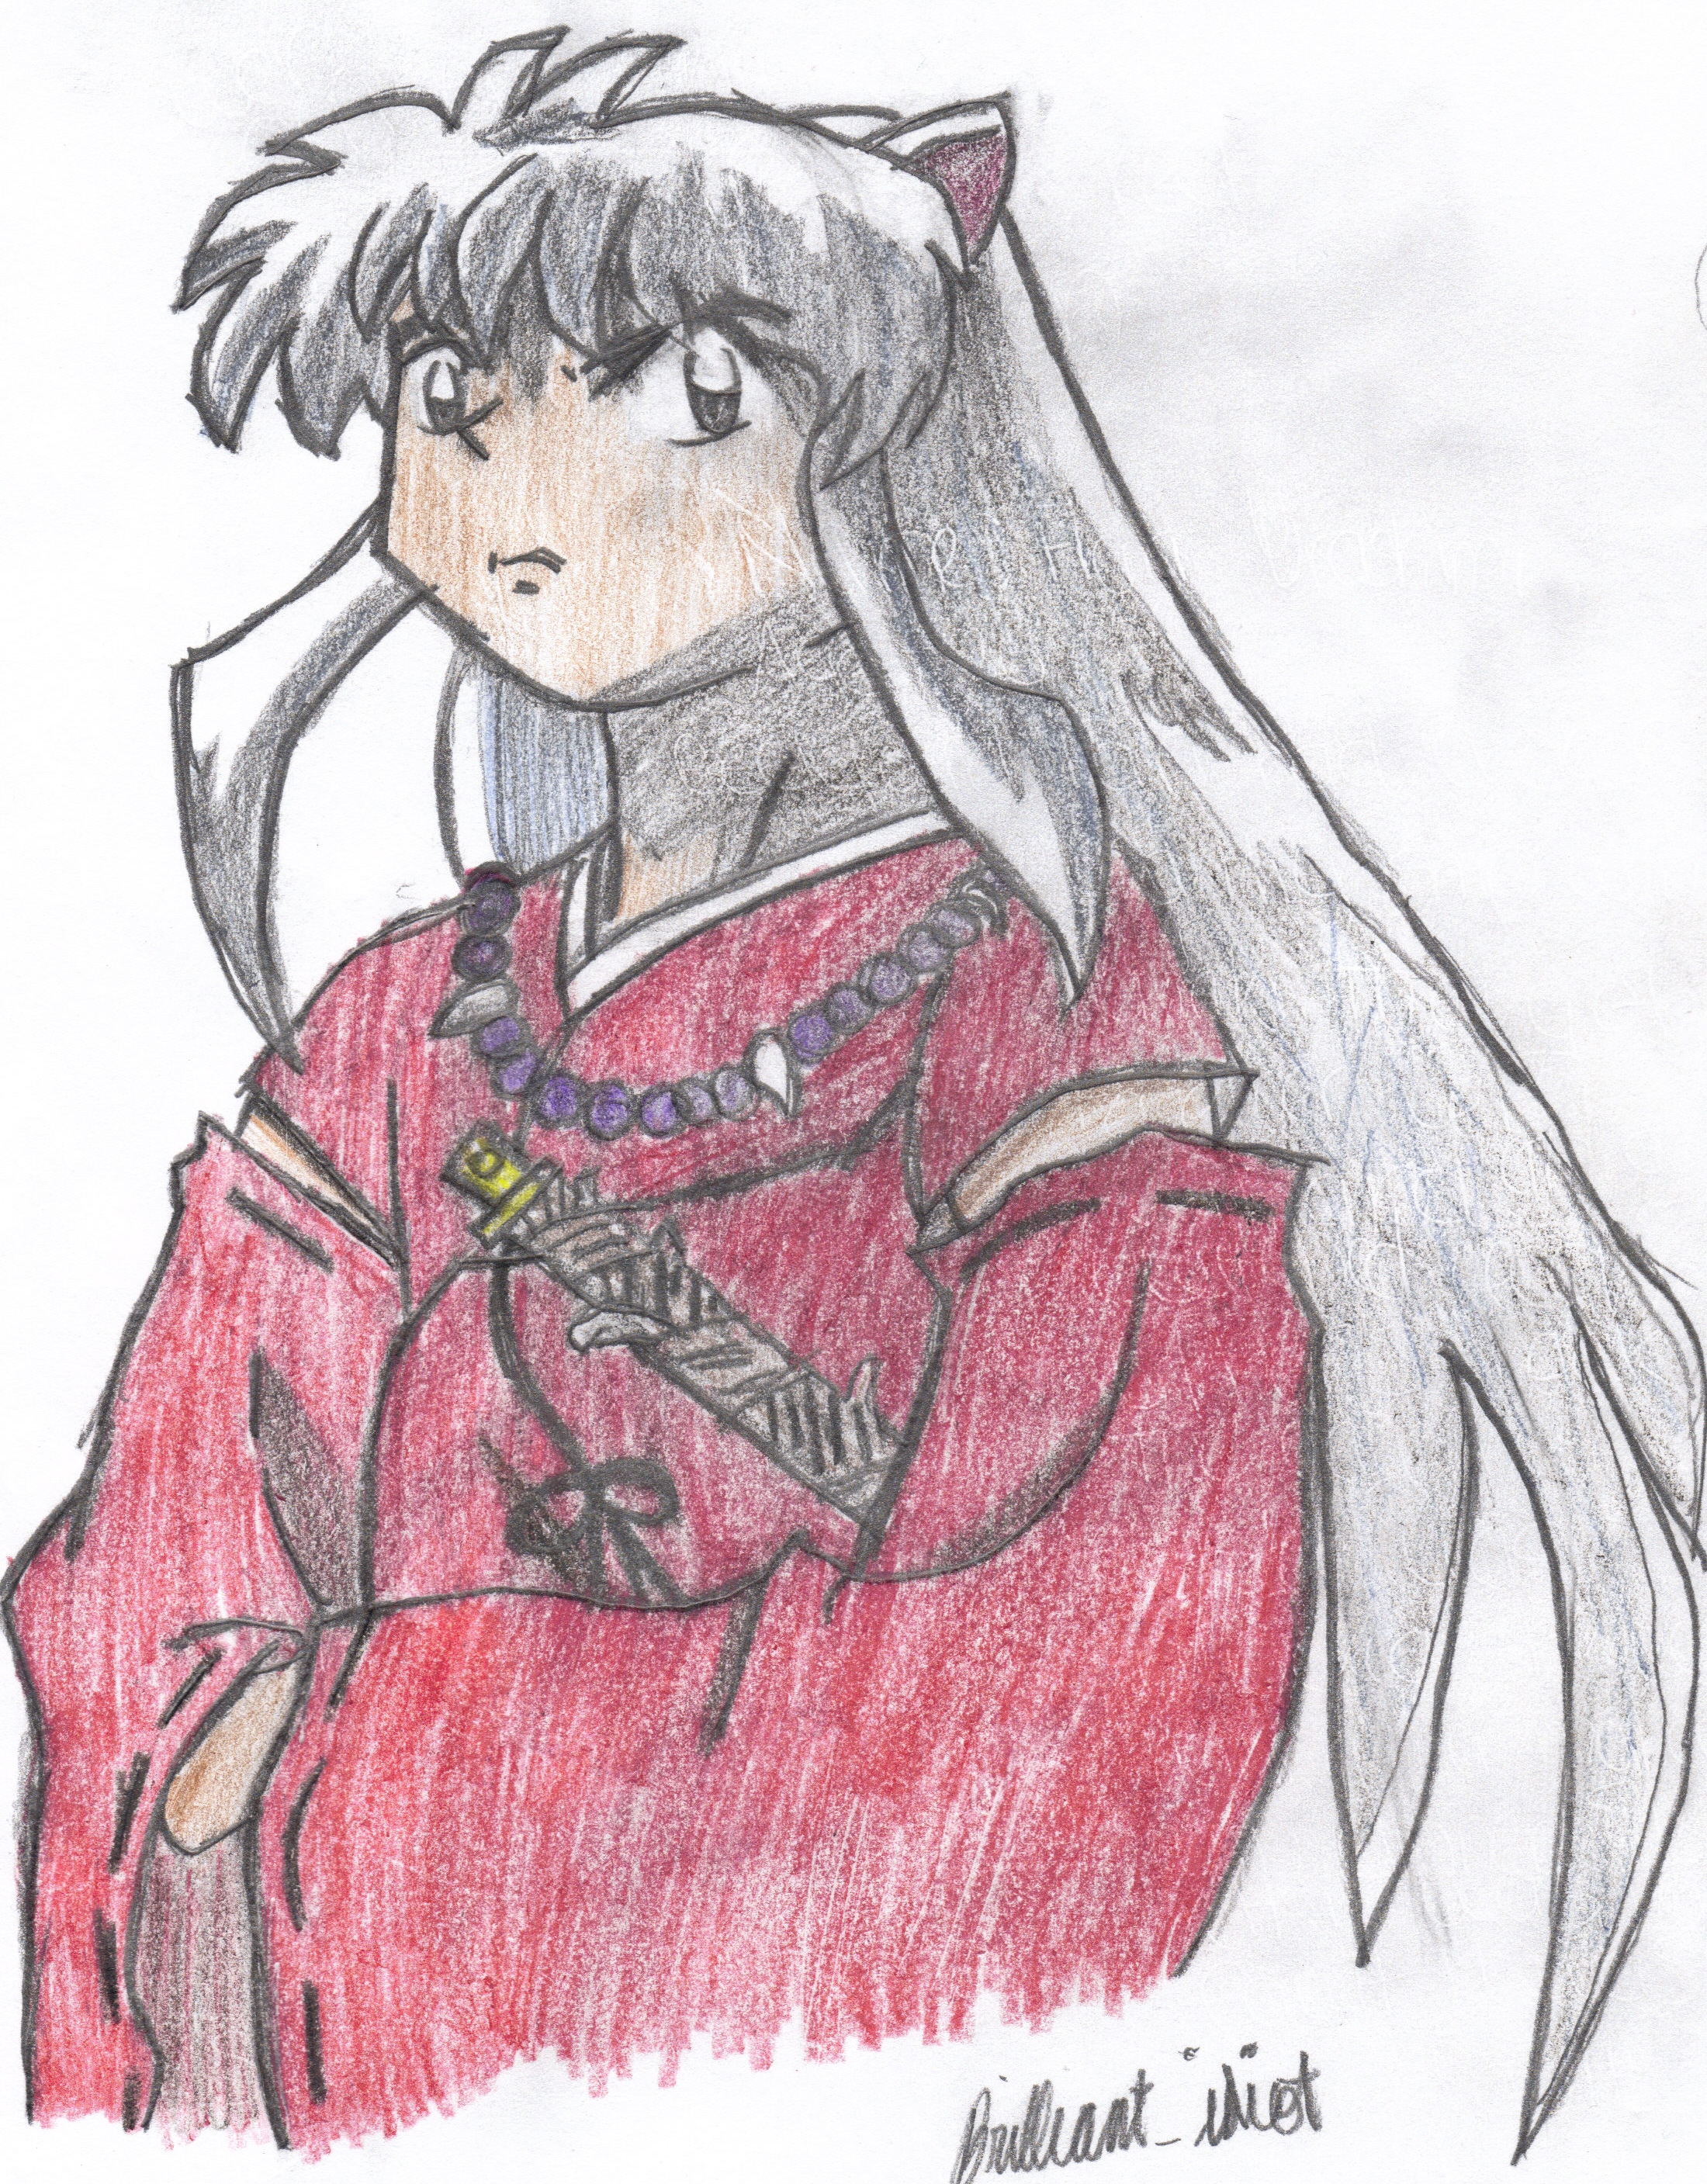 InuYasha in His Aggreviated Mood by Brilliant_idiot